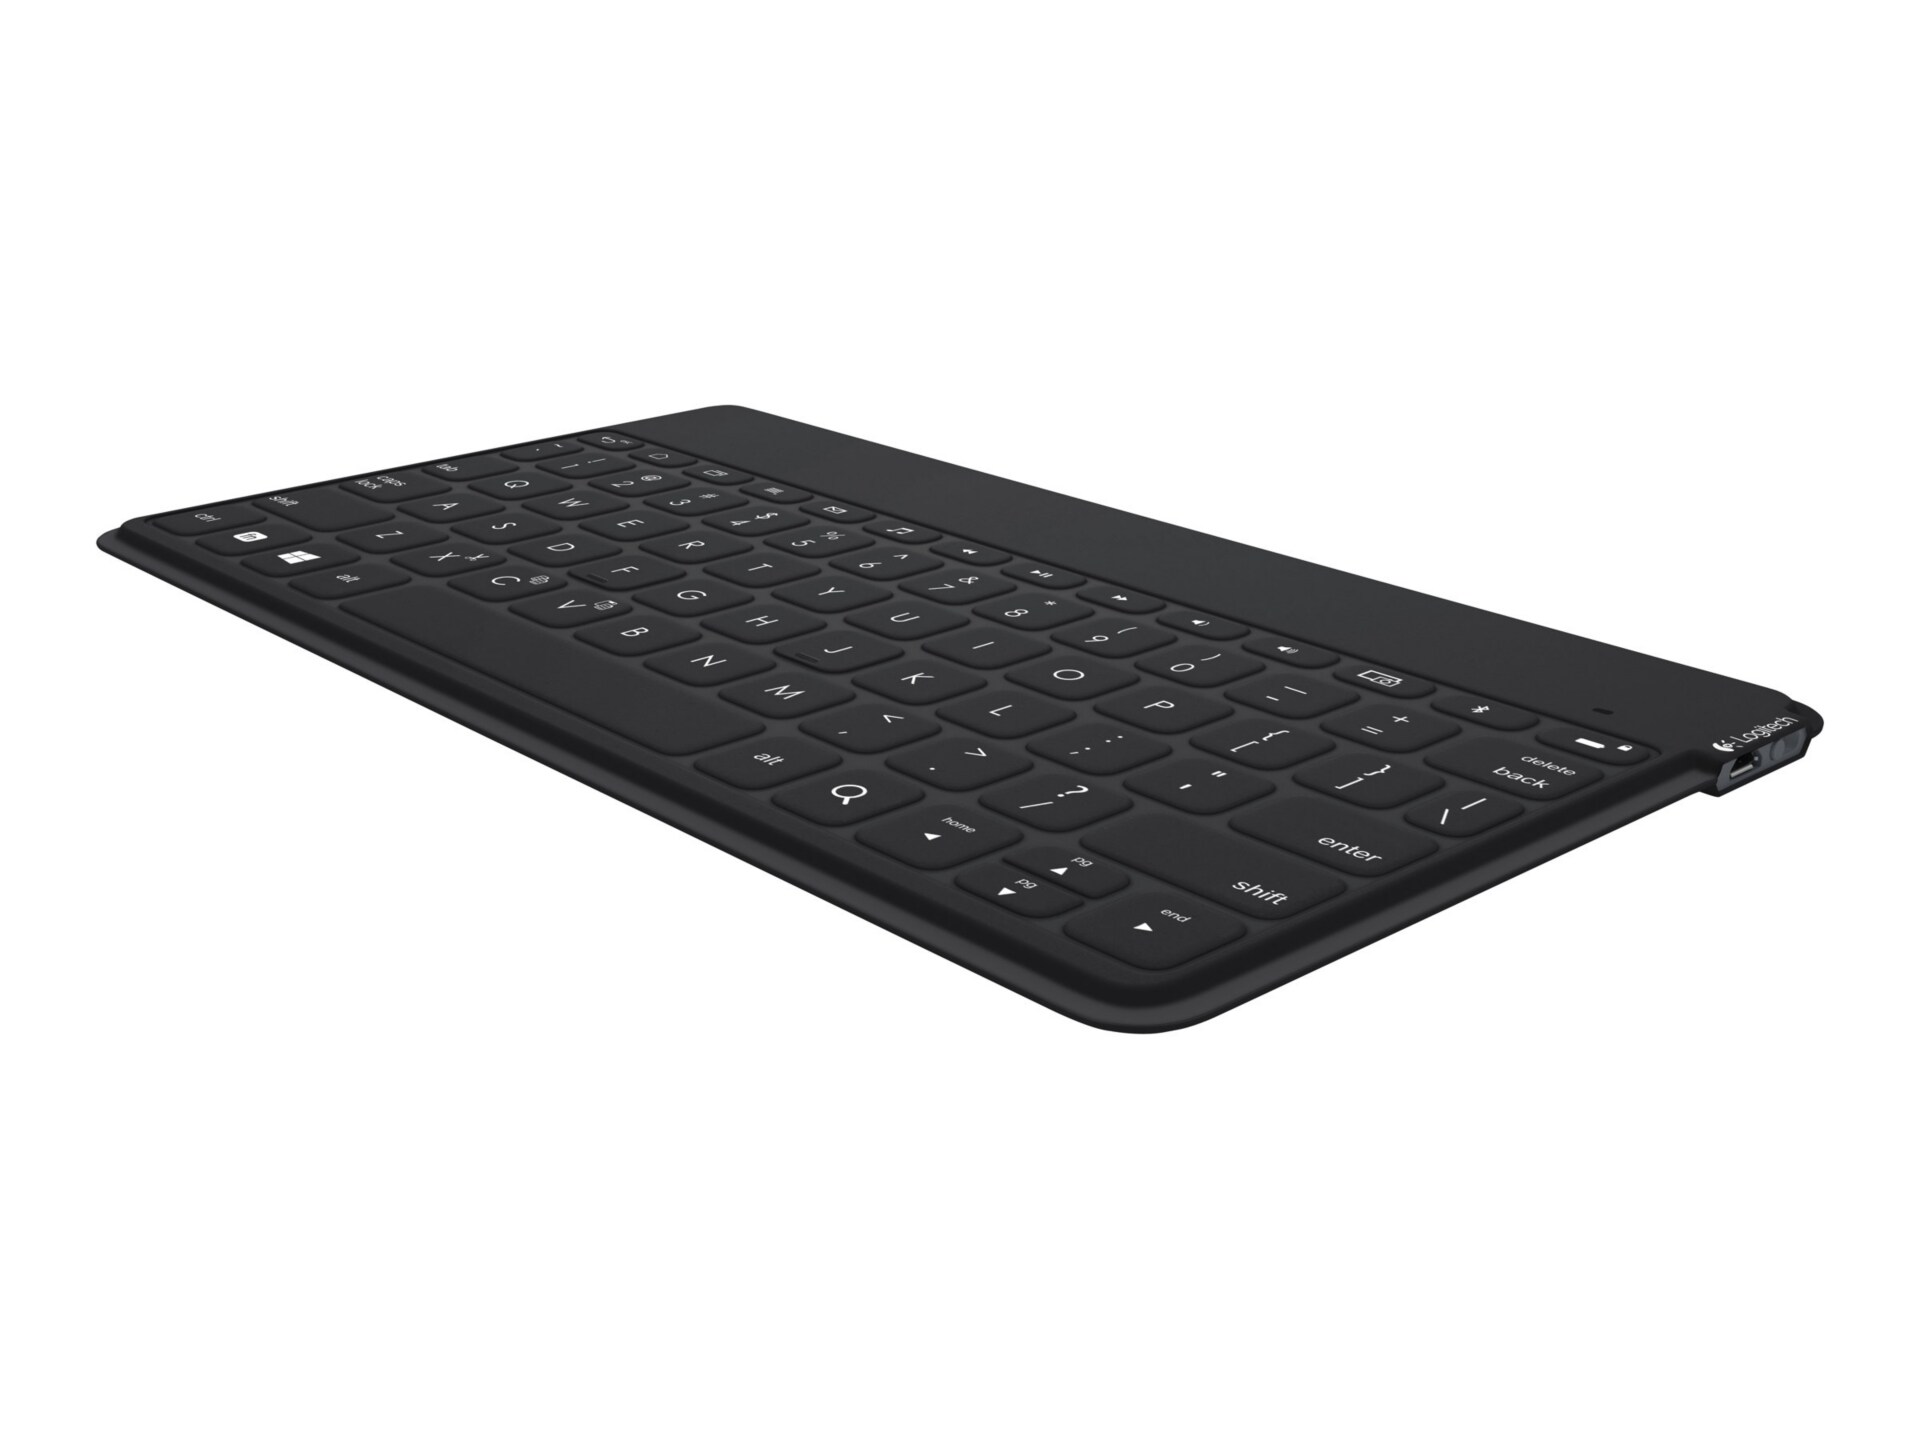 Logitech Keys-To-Go Bluetooth Keyboard for Windows/Android